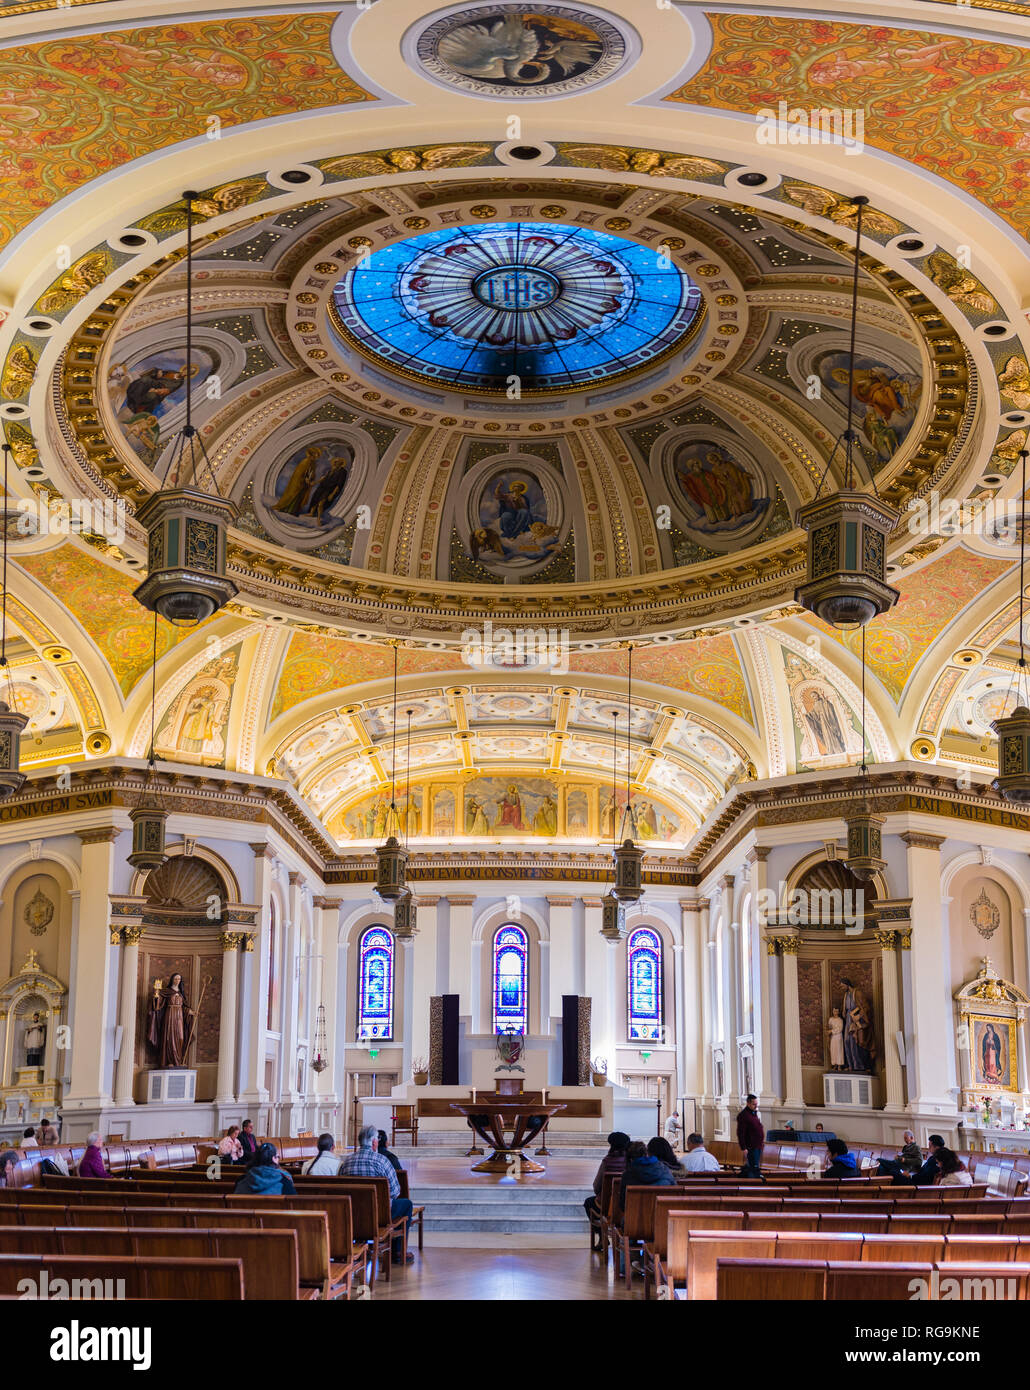 February 21, 2018 San Jose / CA / USA - Interior of the Cathedral Basilica of St. Joseph, a large Roman Catholic church located in Downtown San Jose,  Stock Photo